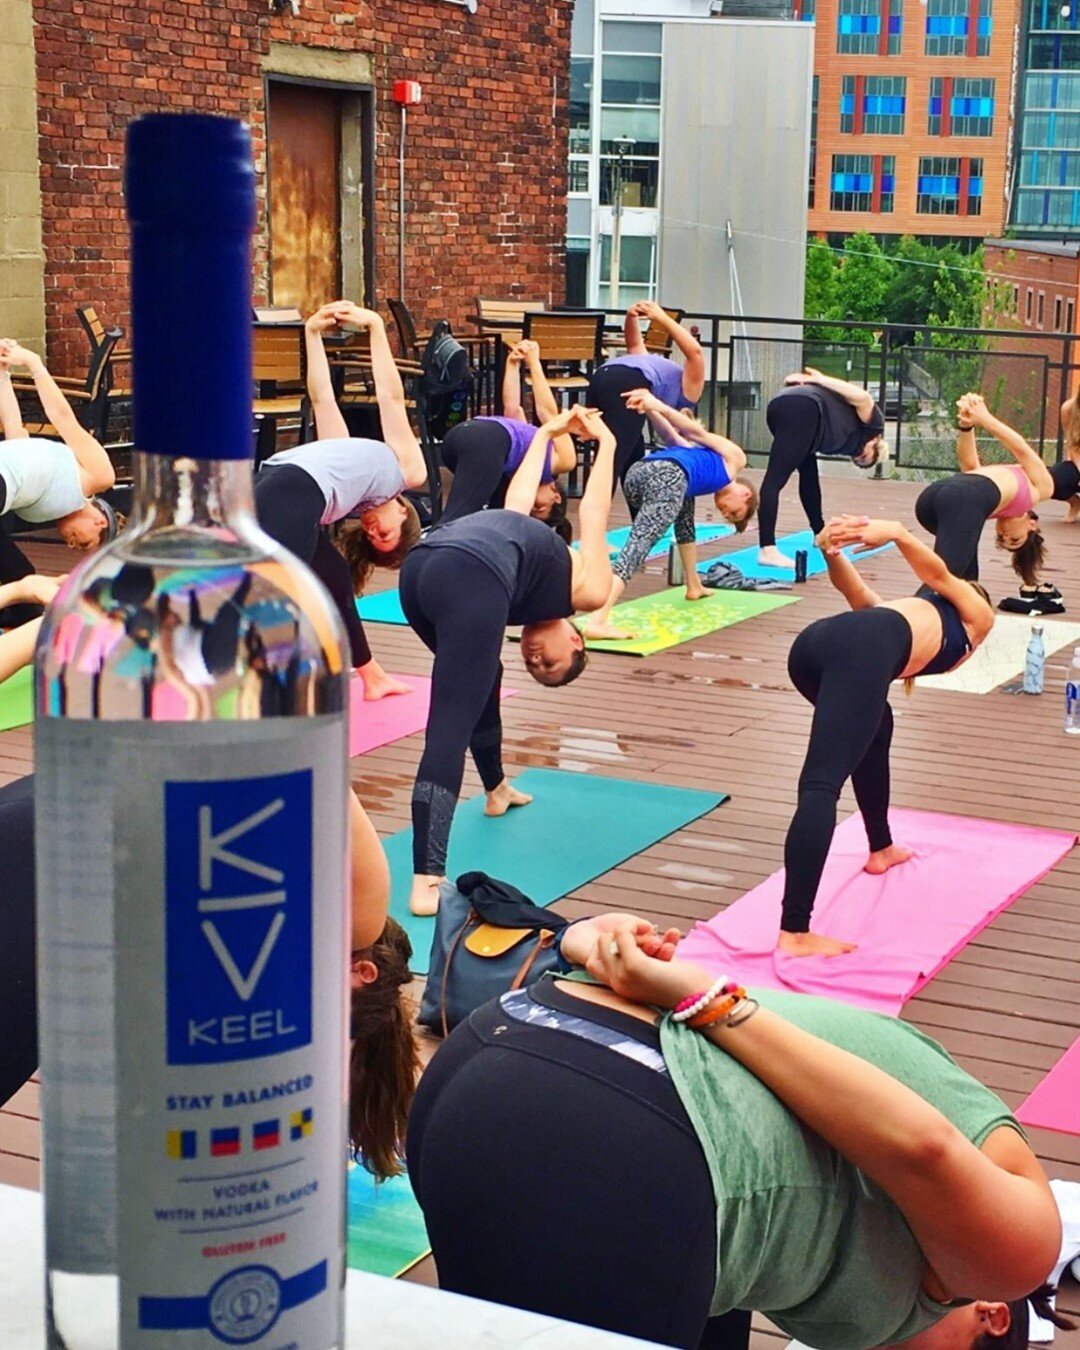 Take us back to the days of roof top yoga followed by KEEL cocktails.⠀ ⠀